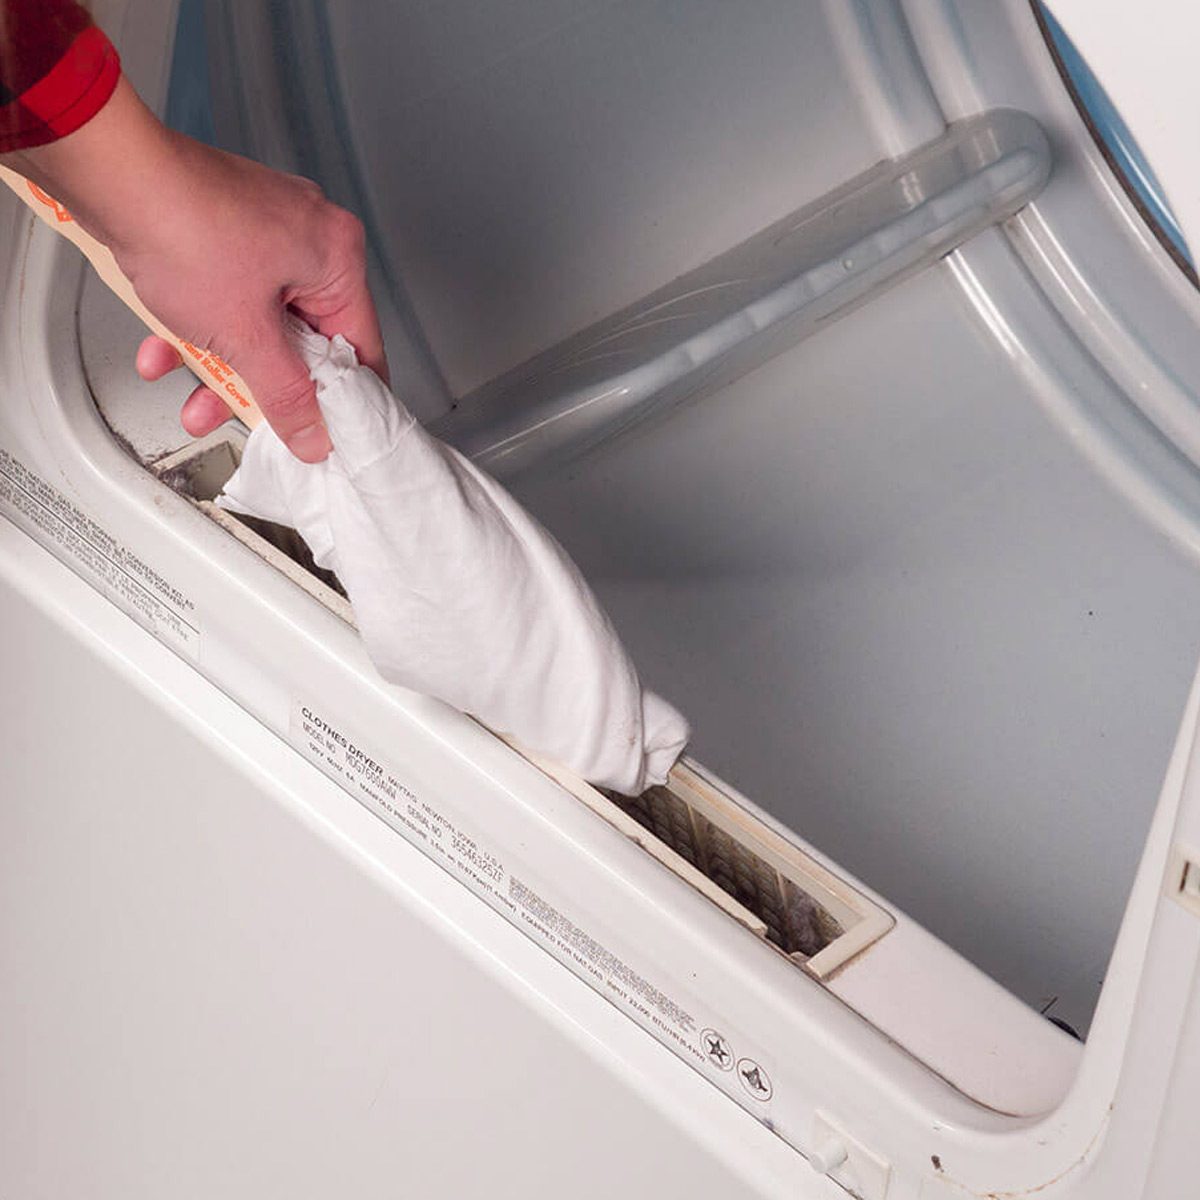 Cleaning lint from dryer